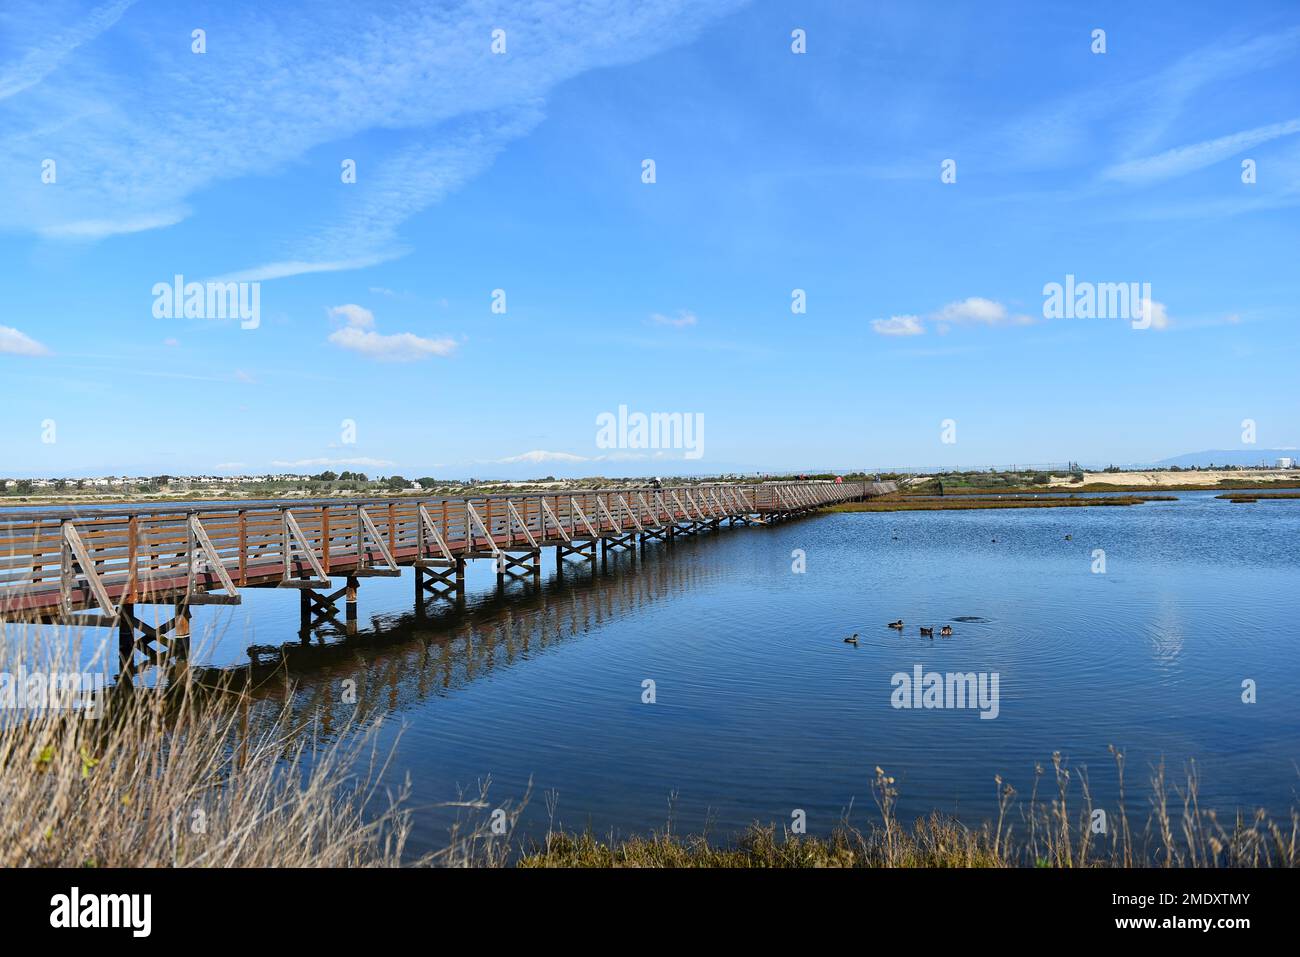 HUNTINGTON BEACH, CALIFORNIA - 18 JAN 2023: People viewing wildlife on the bridge at the Bolsa Chica Ecological Reserve, the largest saltwater marsh a Stock Photo